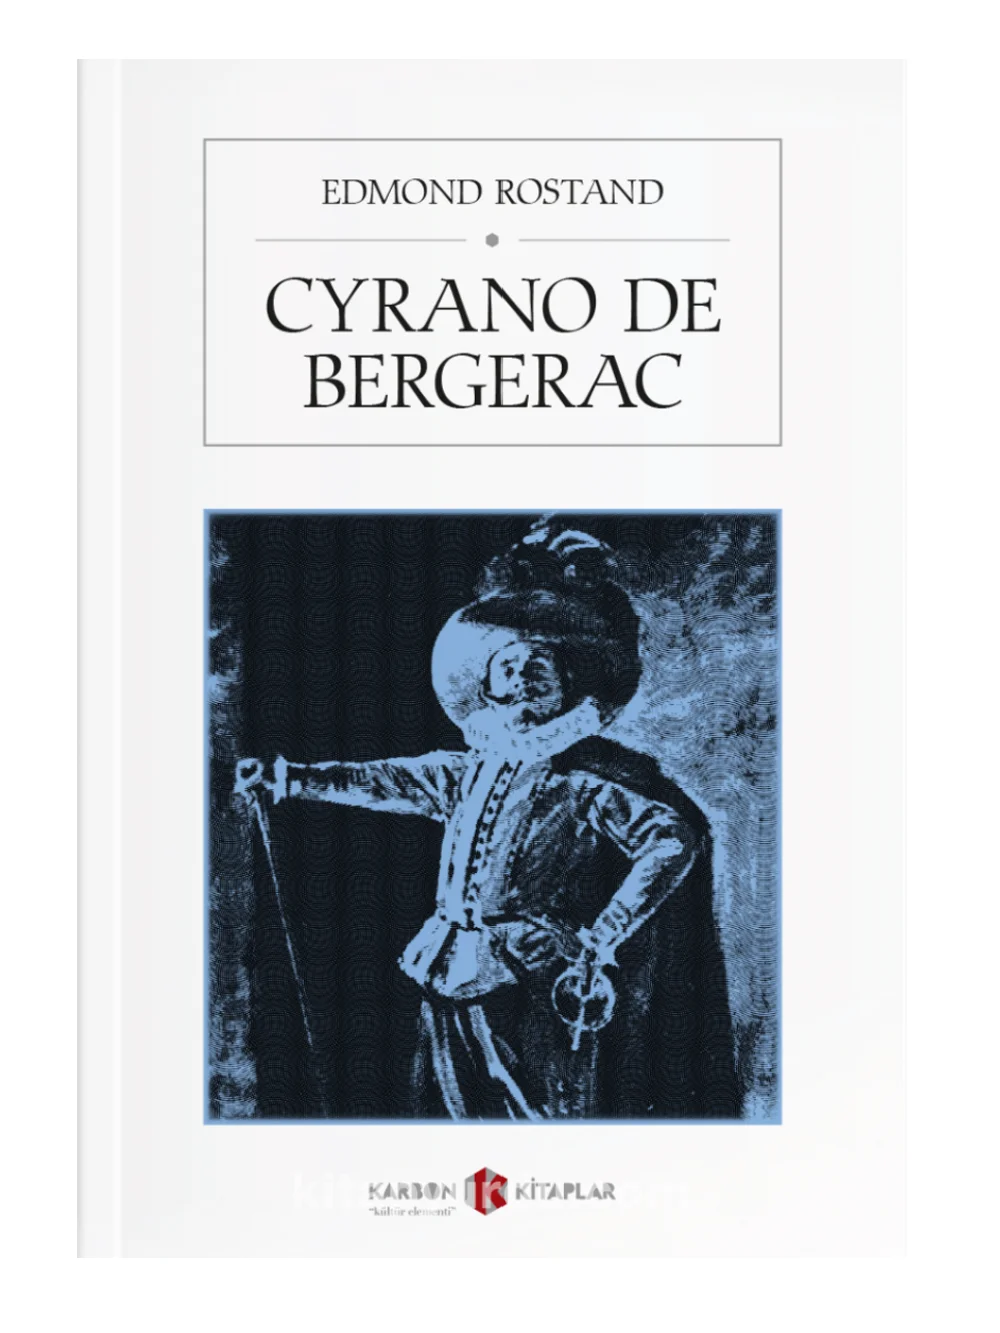 

Cyrano de Bergerac - Edmond Rostand - French book - The best classics of world literature - Nice gift for friends and French learners